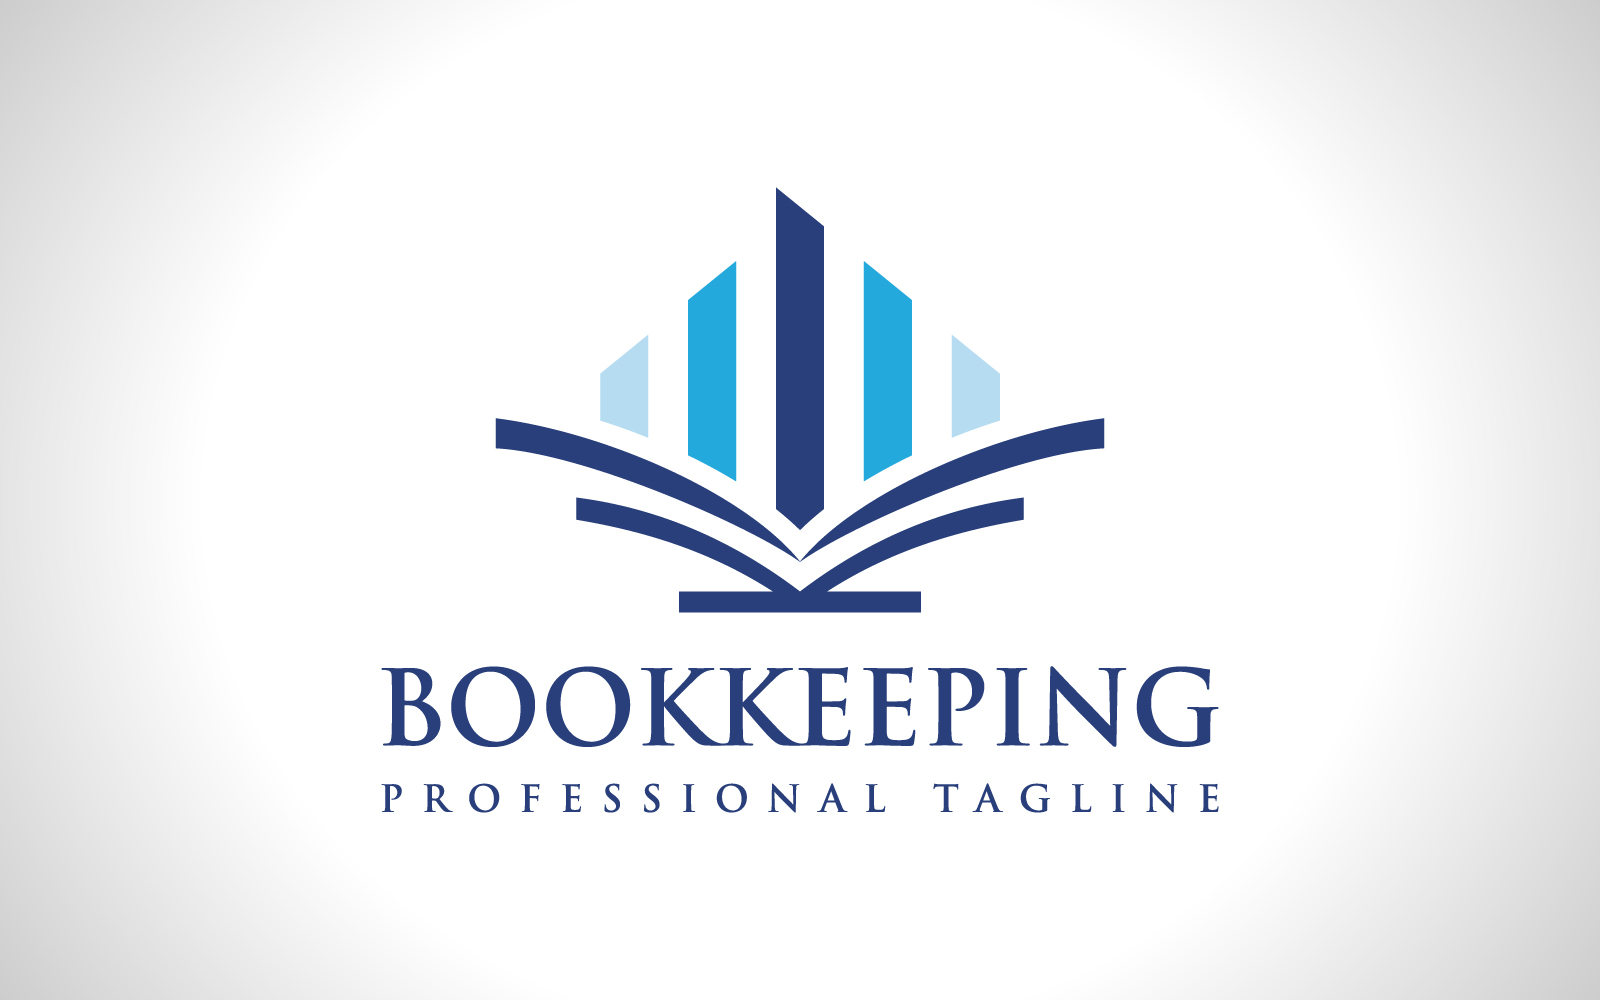 Professional Accounting Bookkeeping Logo Design